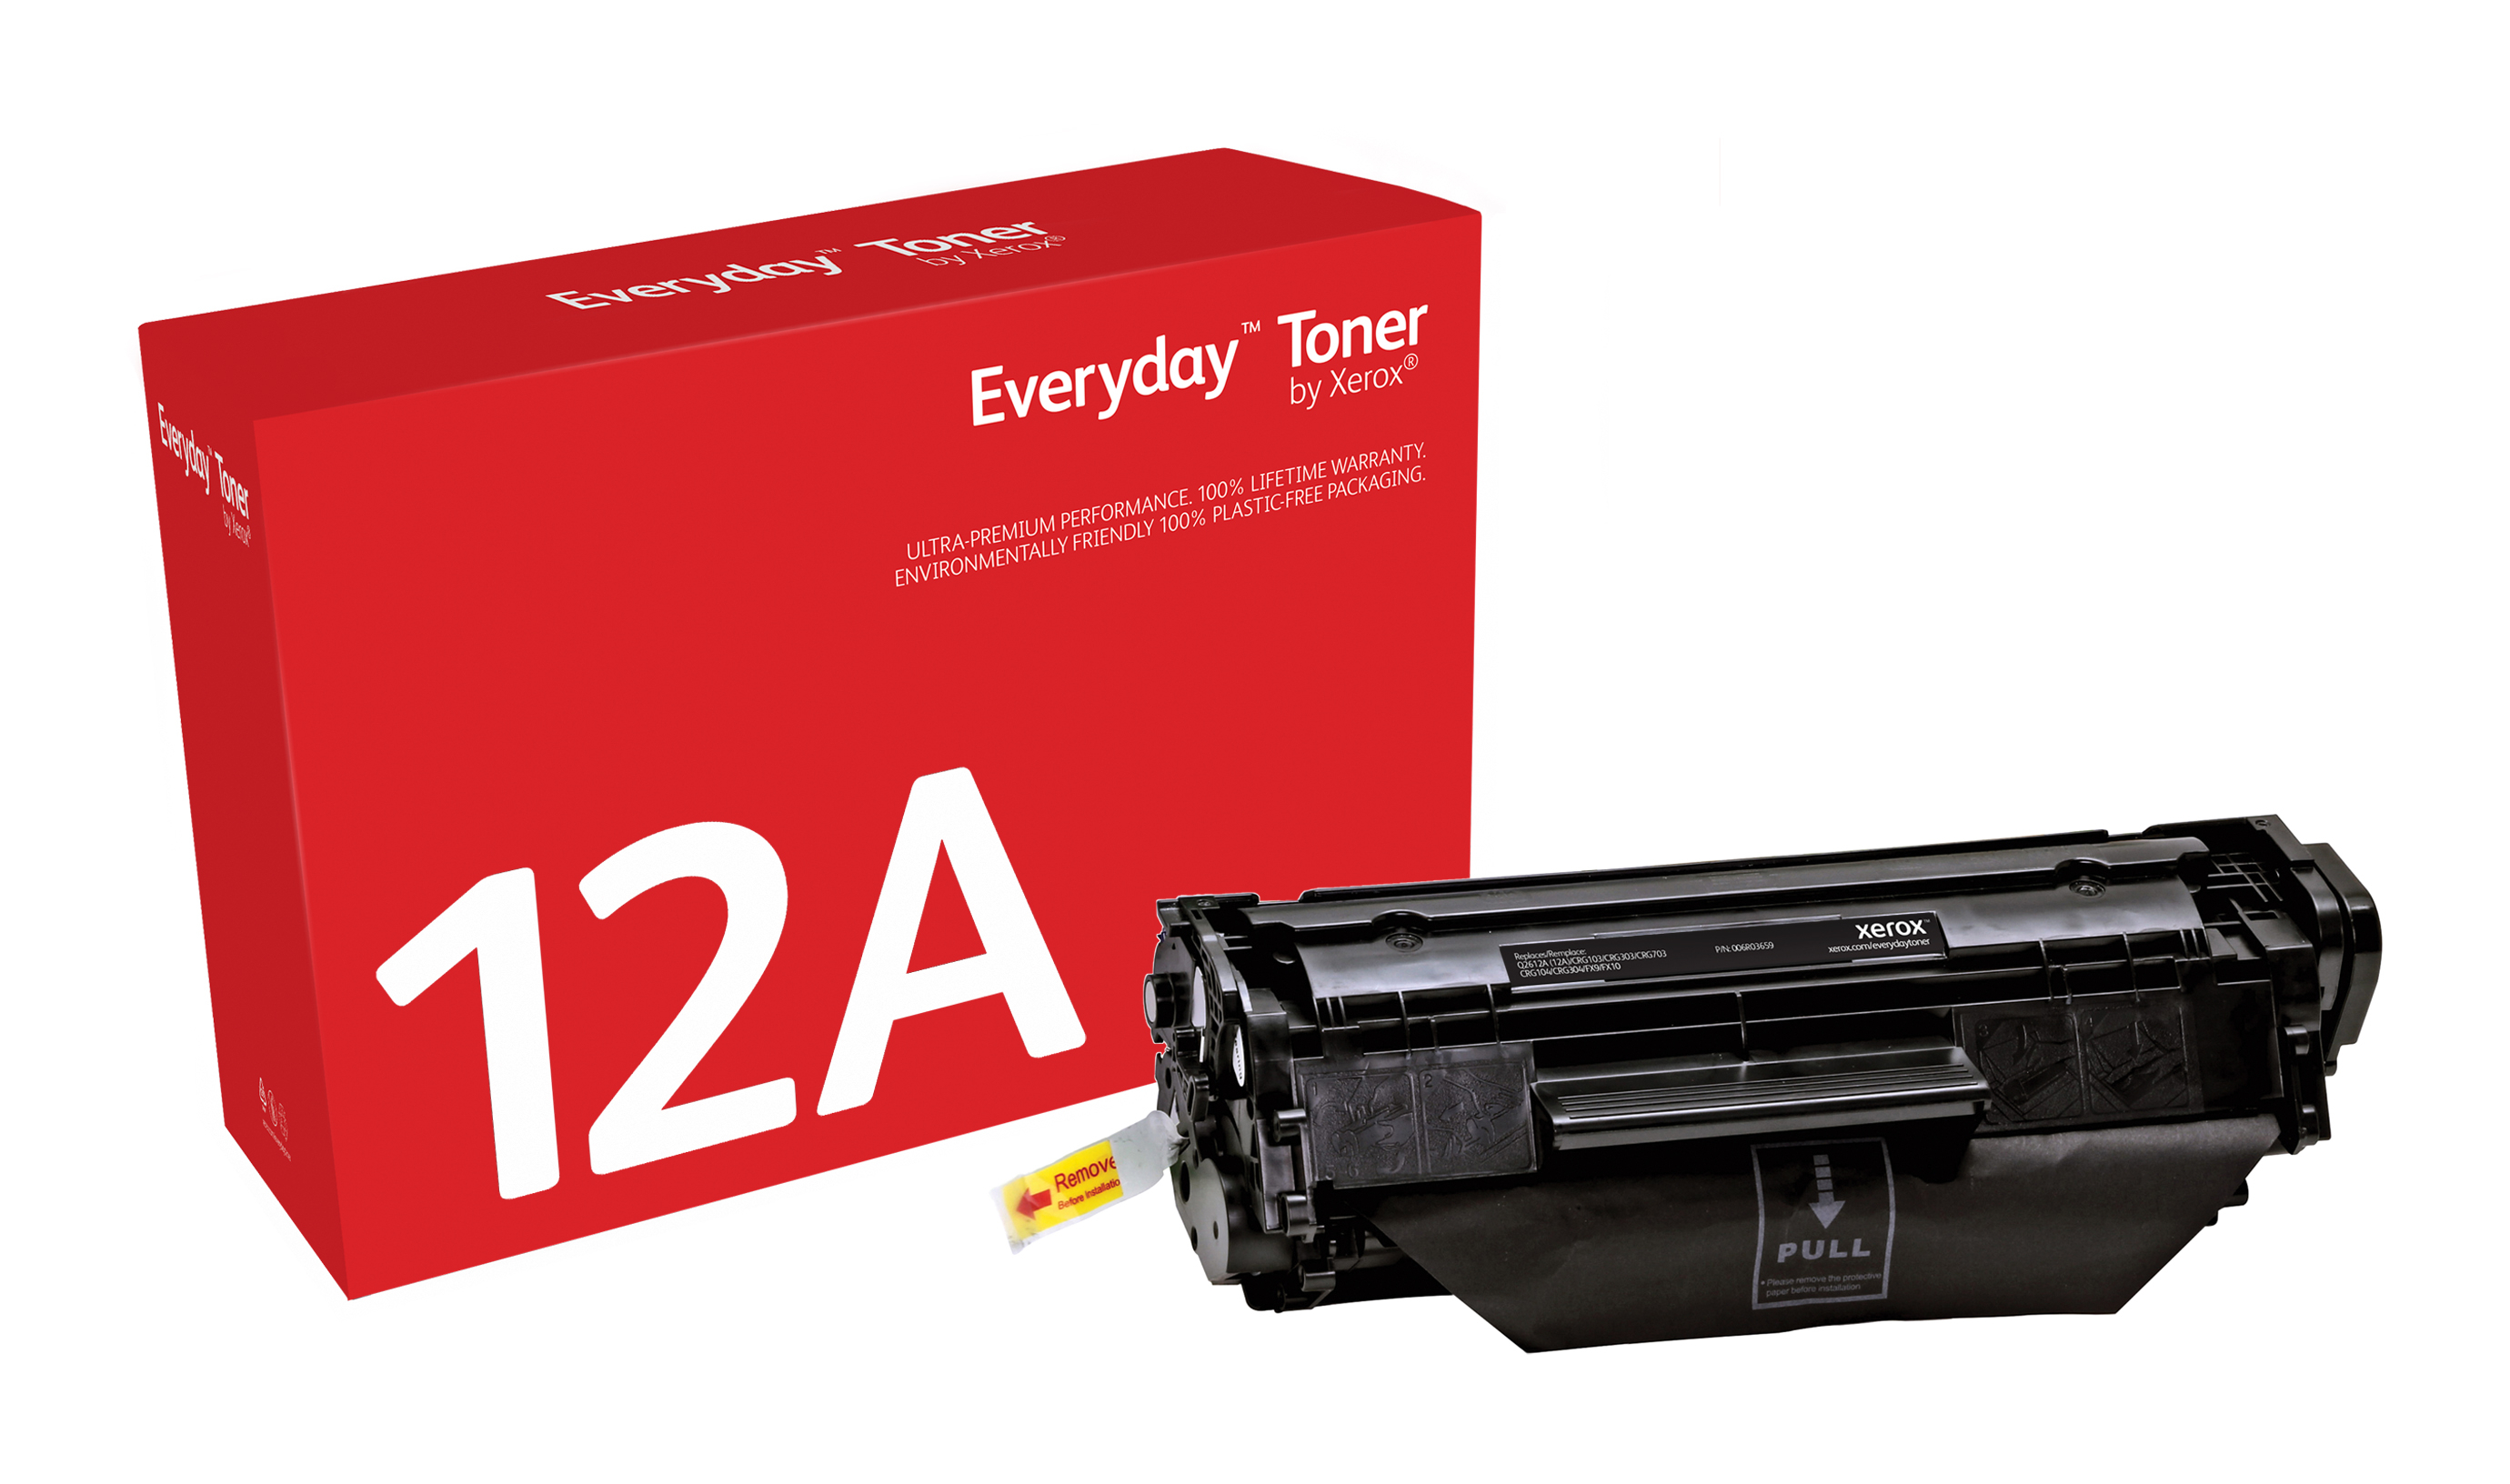 Everyday Black Toner compatible 12A (Q2612A), Standard 006R03659 by Xerox